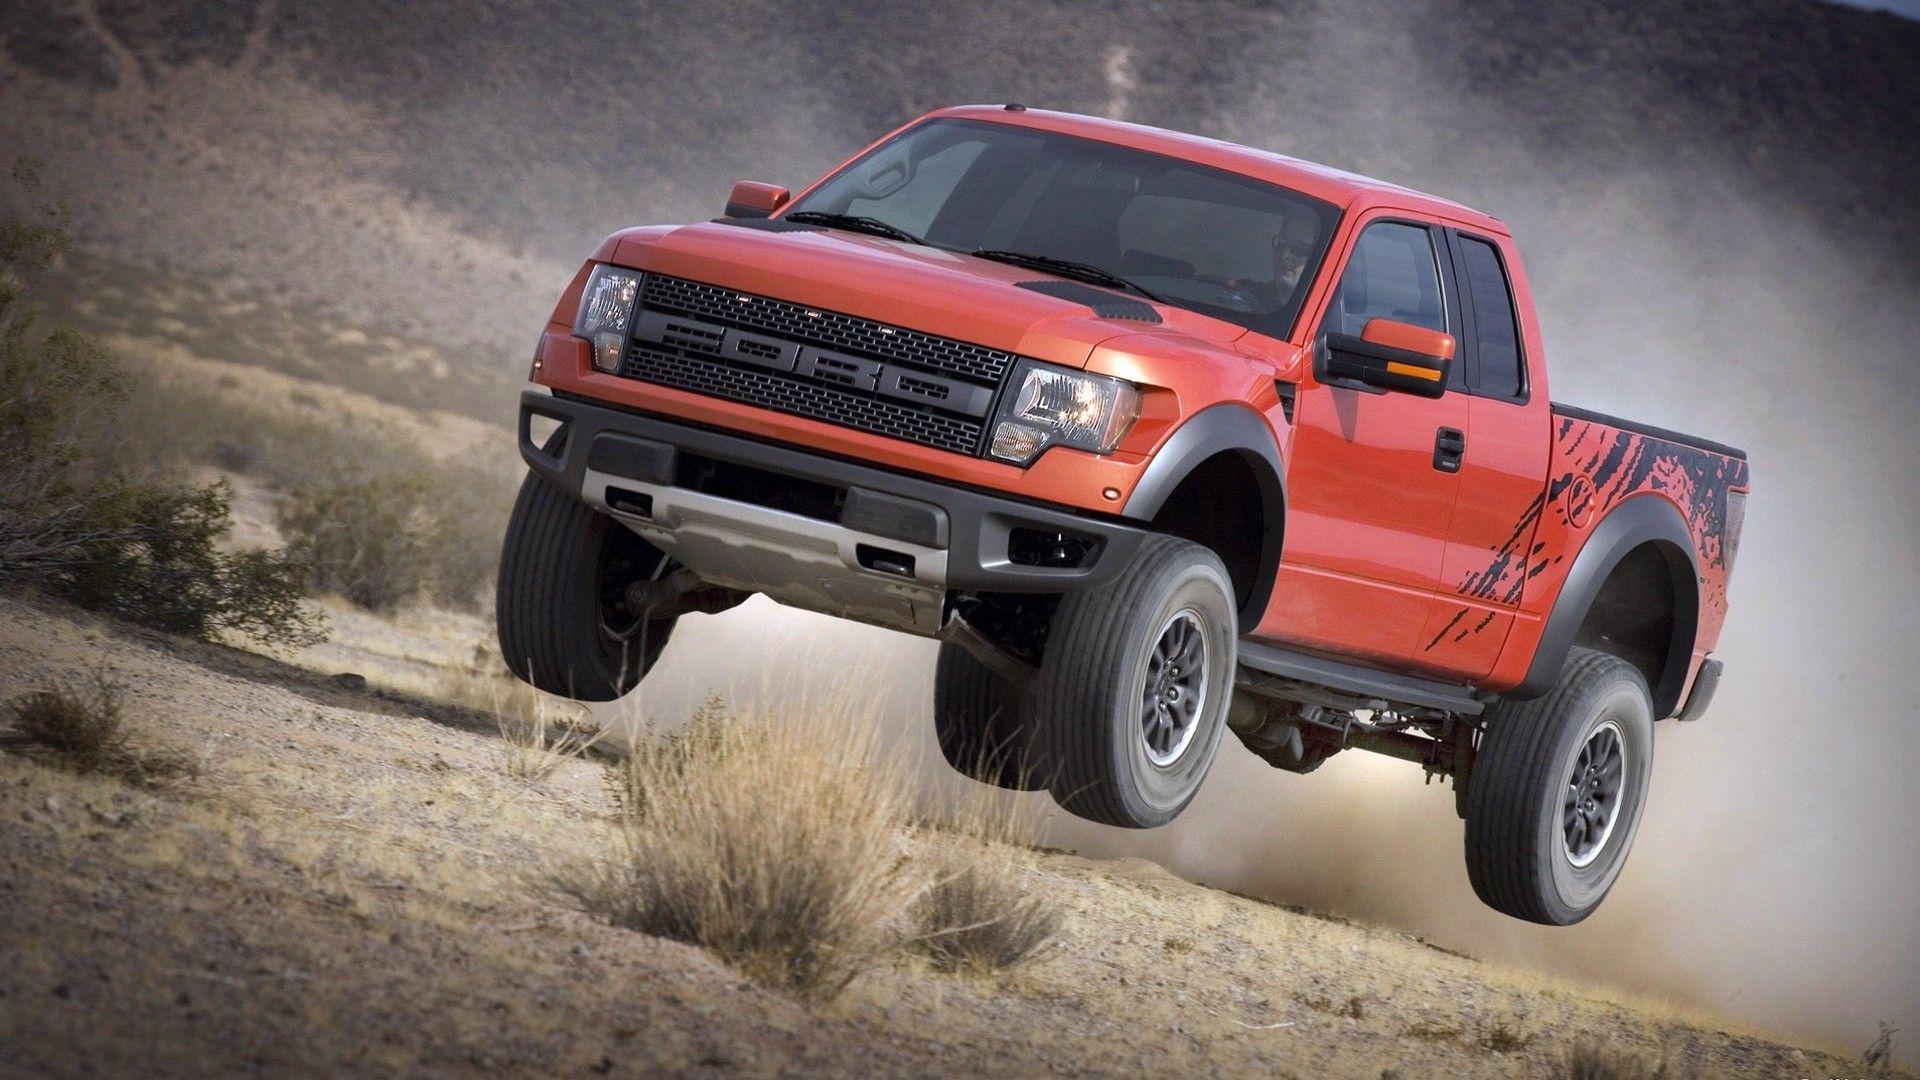 A Vehicles Ford Raptor Trucks Wallpapers 1920x1200 284704